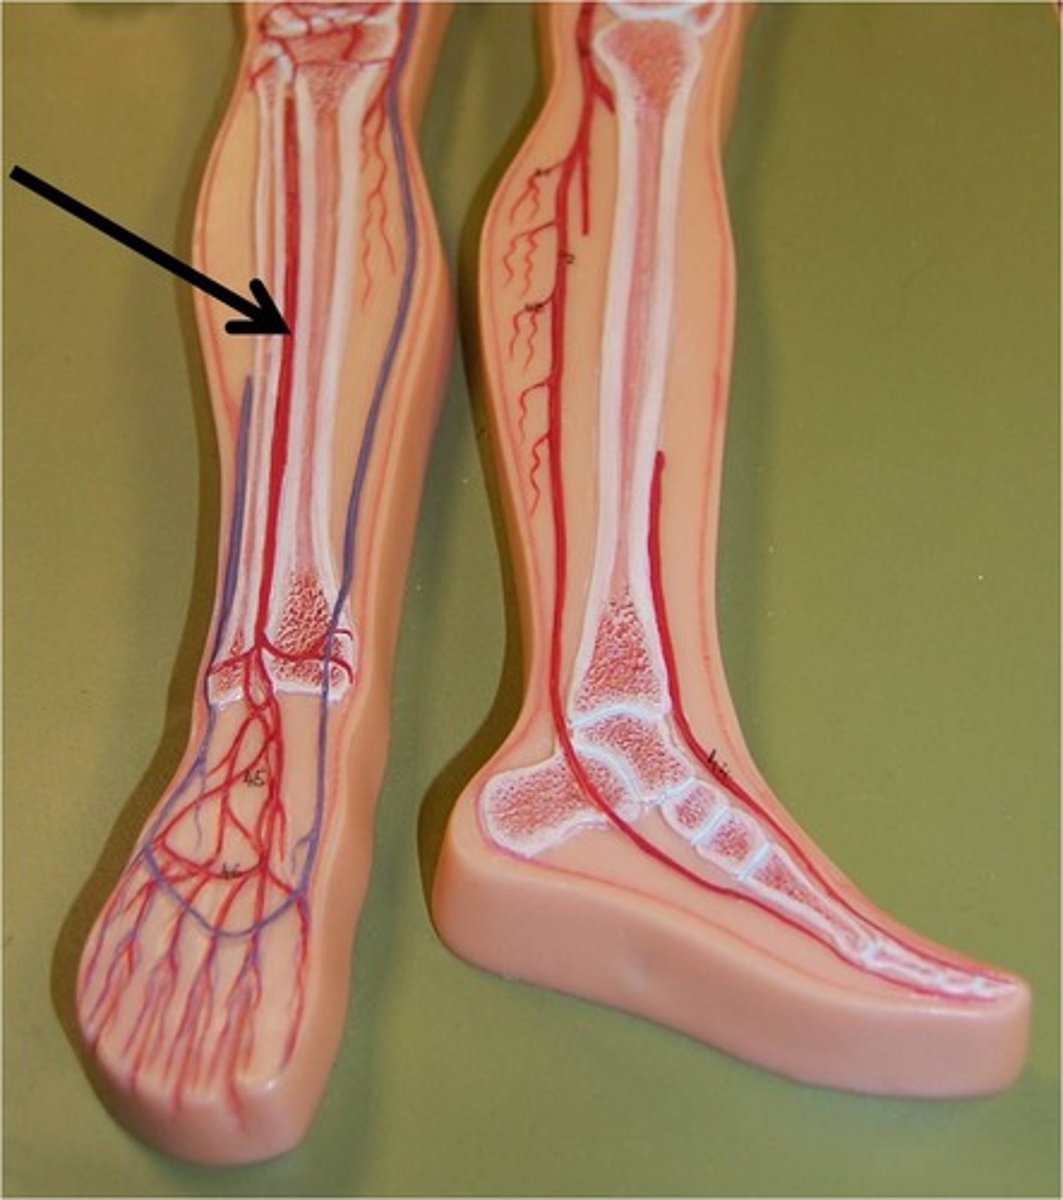 <p>A branch of the popliteal artery that supplies the anterior compartment of the leg. It becomes the dorsalis pedis artery on the dorsum of the ankle and contributes blood to the dorsal arch.</p>